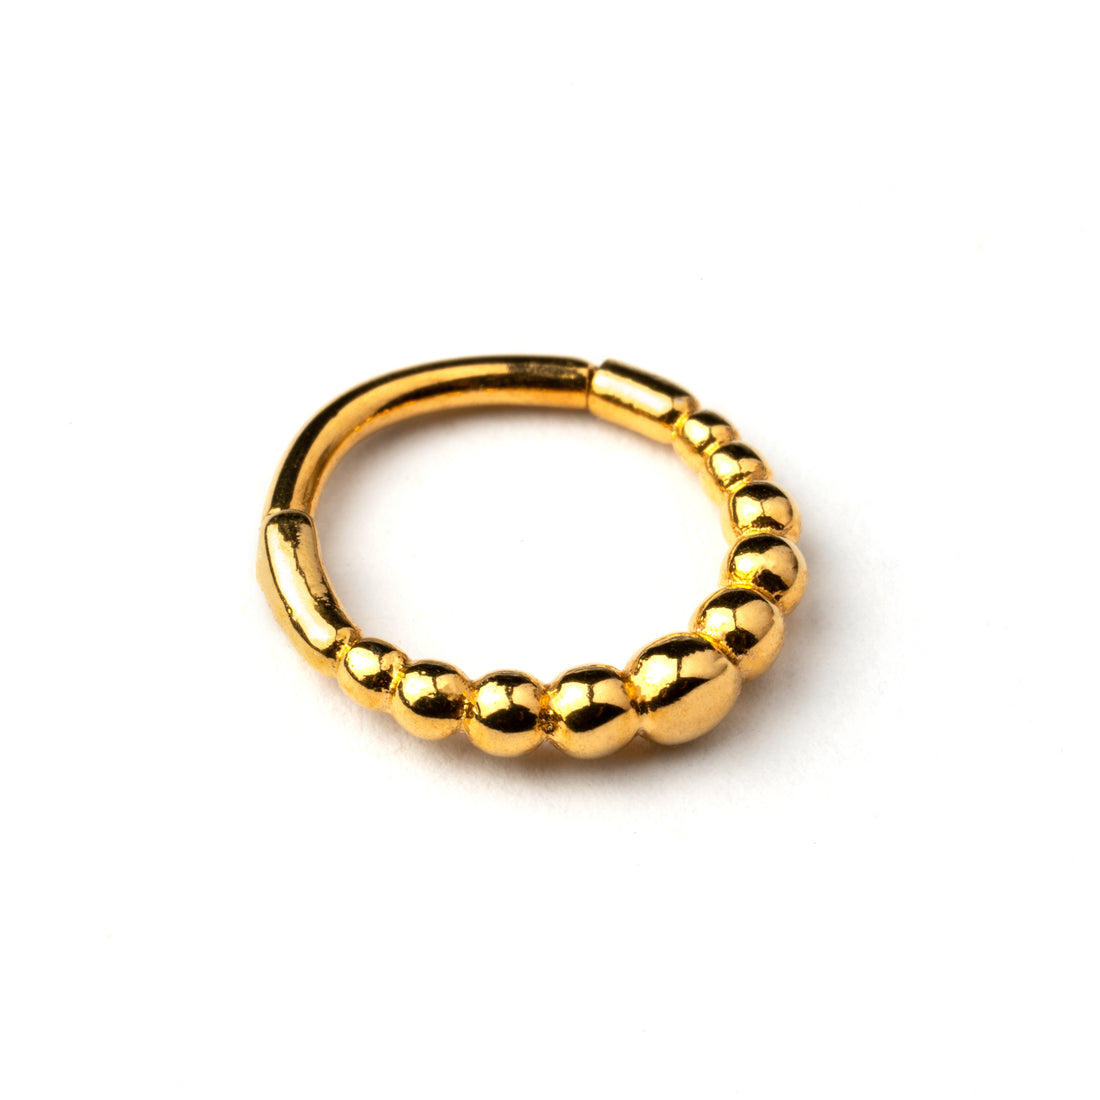 Golden surgical steel clicker piercing ring formed by tiny spheres